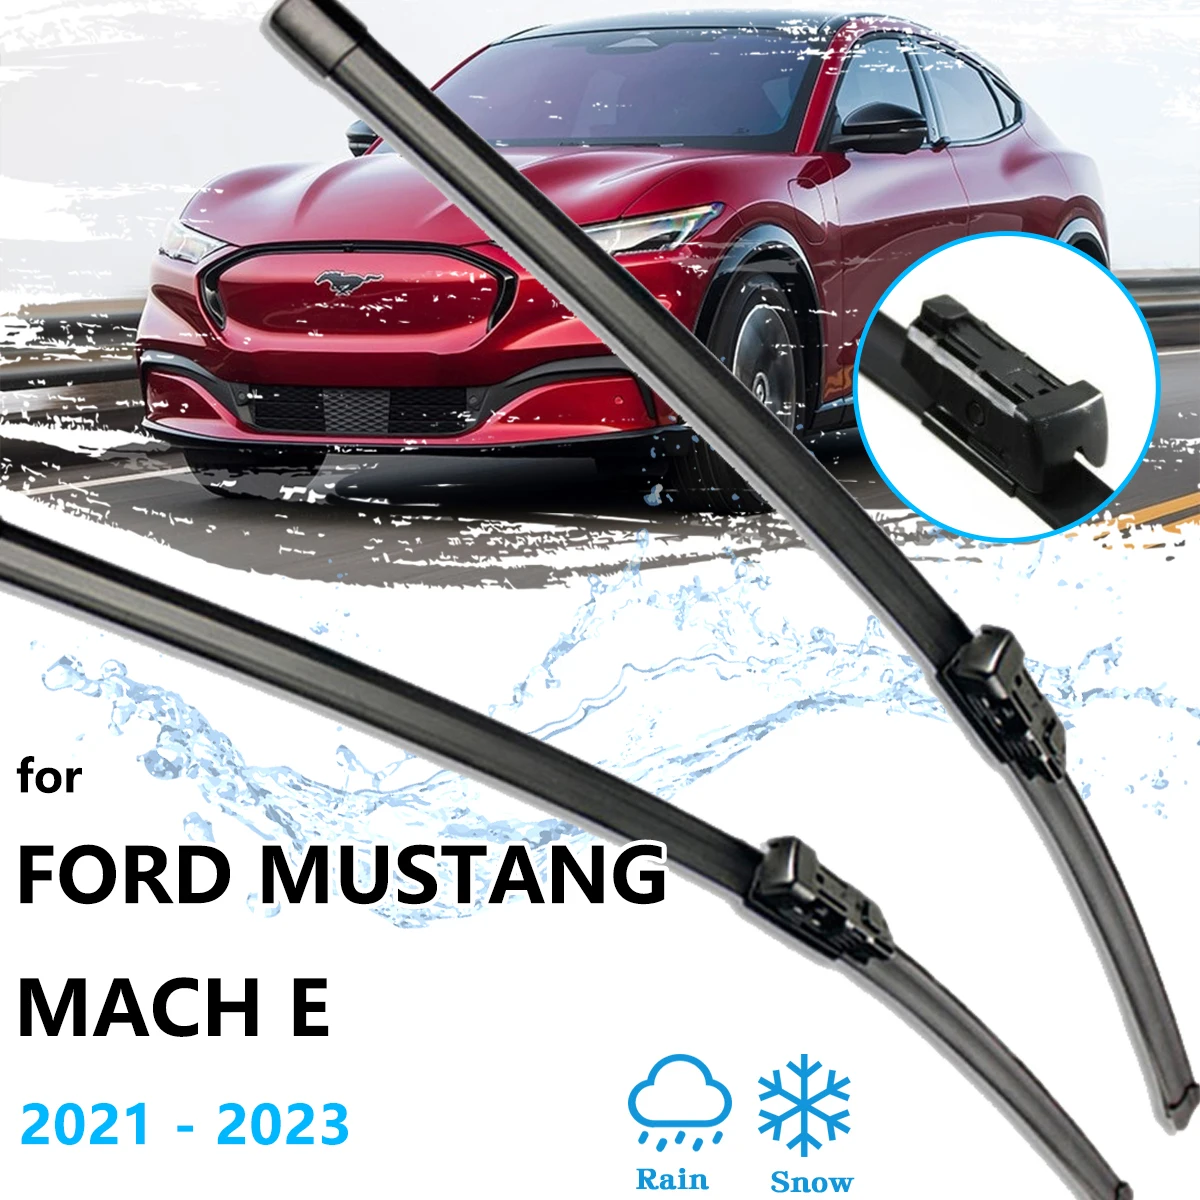 

2x For Ford Mustang Mach E 2021 2022 Rubber Strip Refill Front Wiper Blades Window Windshield Windscreen Brushes Cleaning Parts